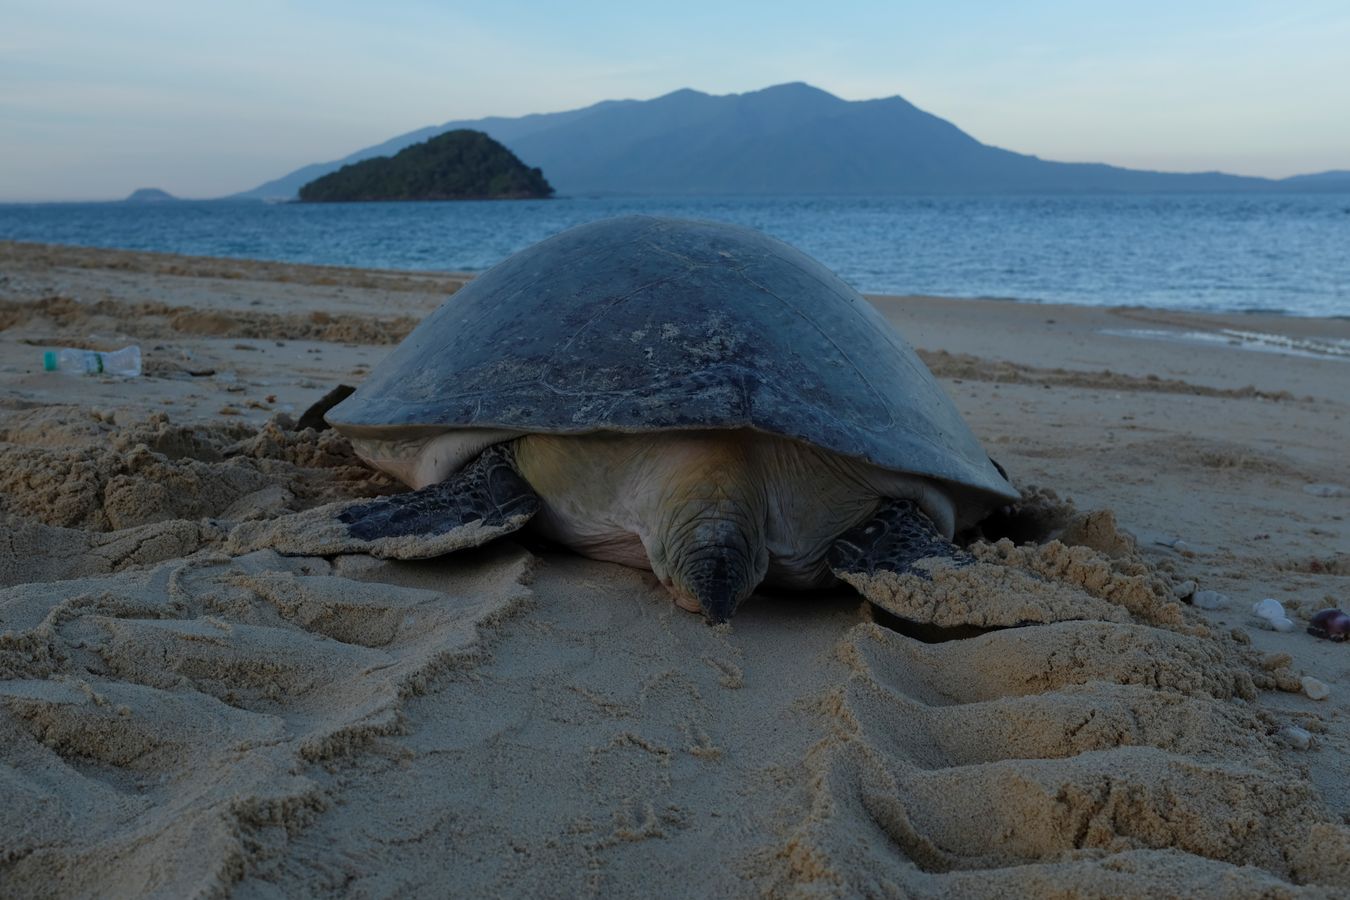 Green turtle returning to the ocean seen from behind, with the small island Talang Kecil and Pueh Mountain in the background.